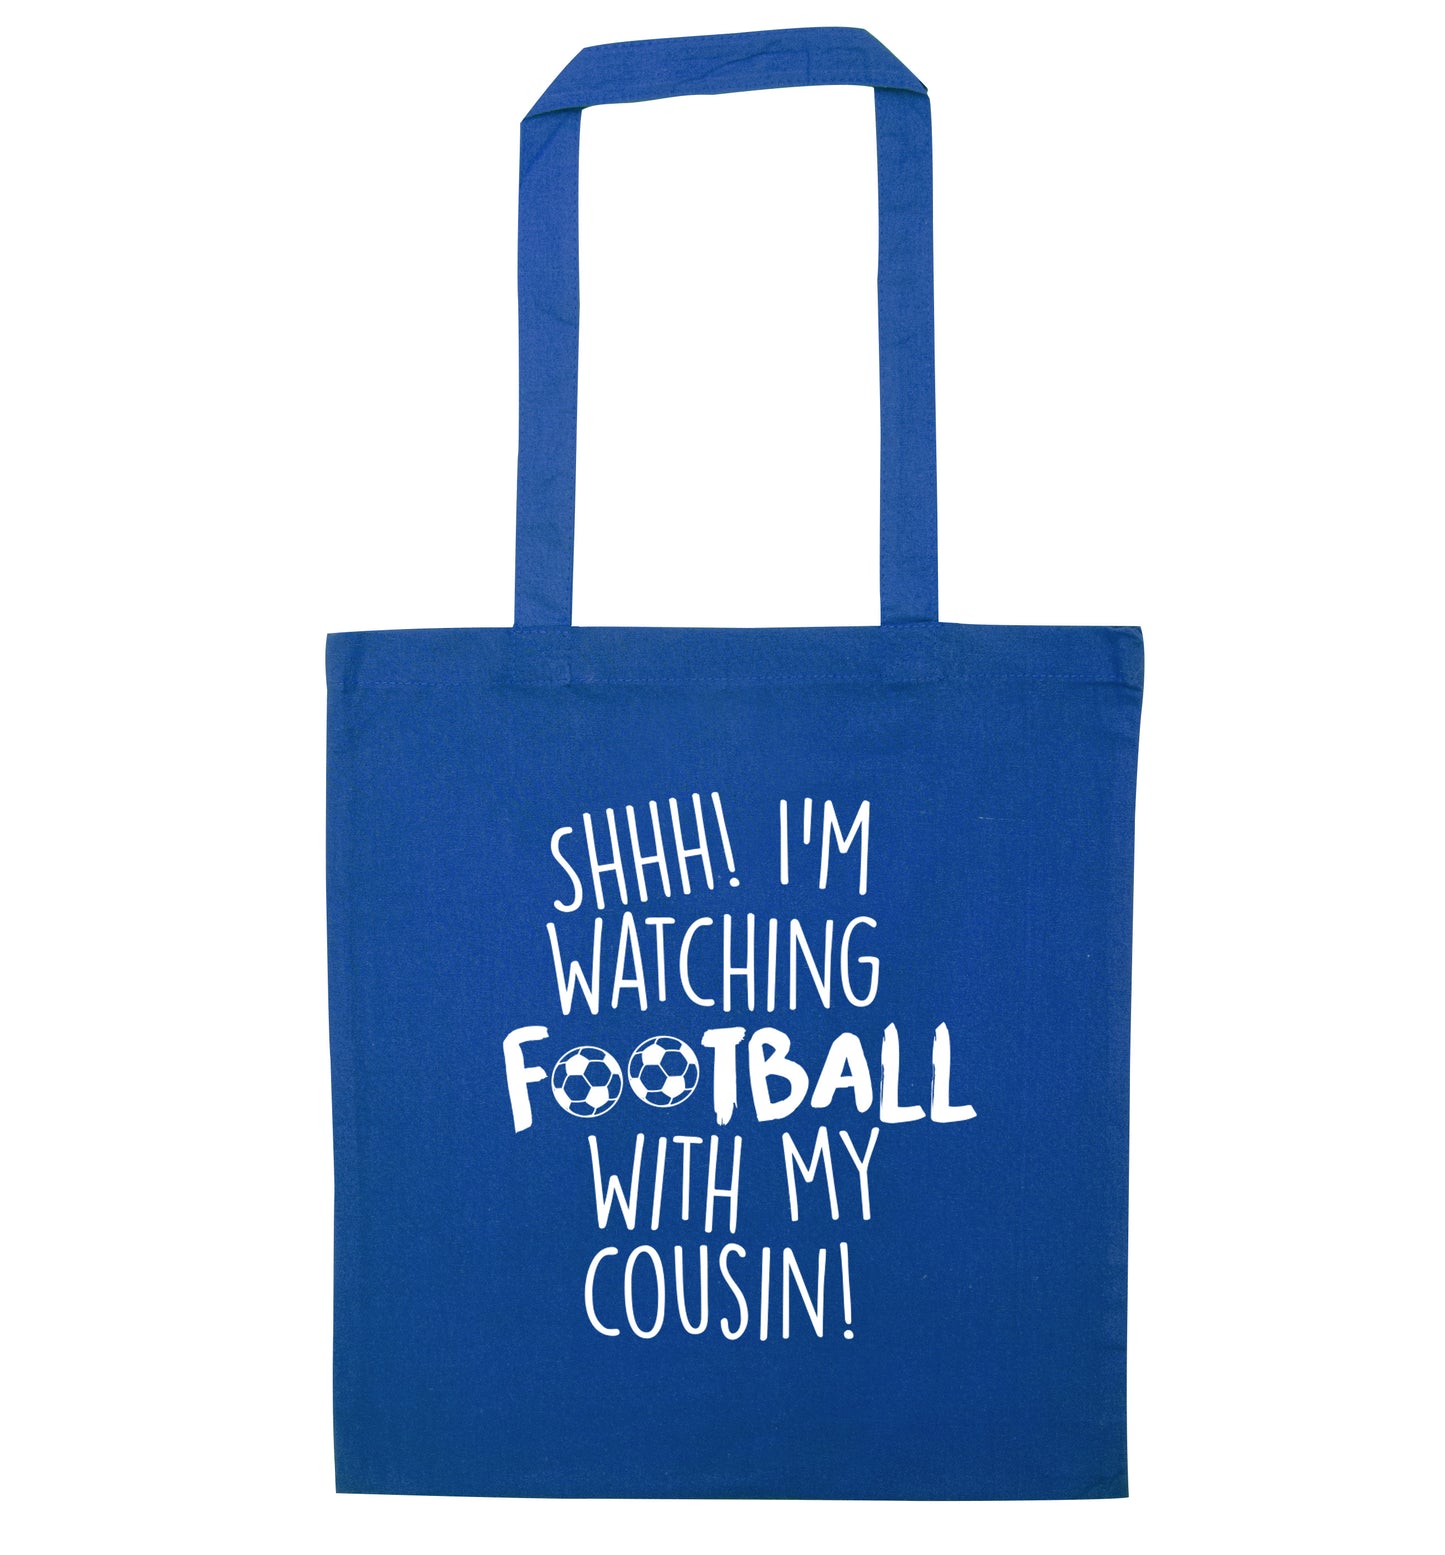 Shhh I'm watching football with my cousin blue tote bag